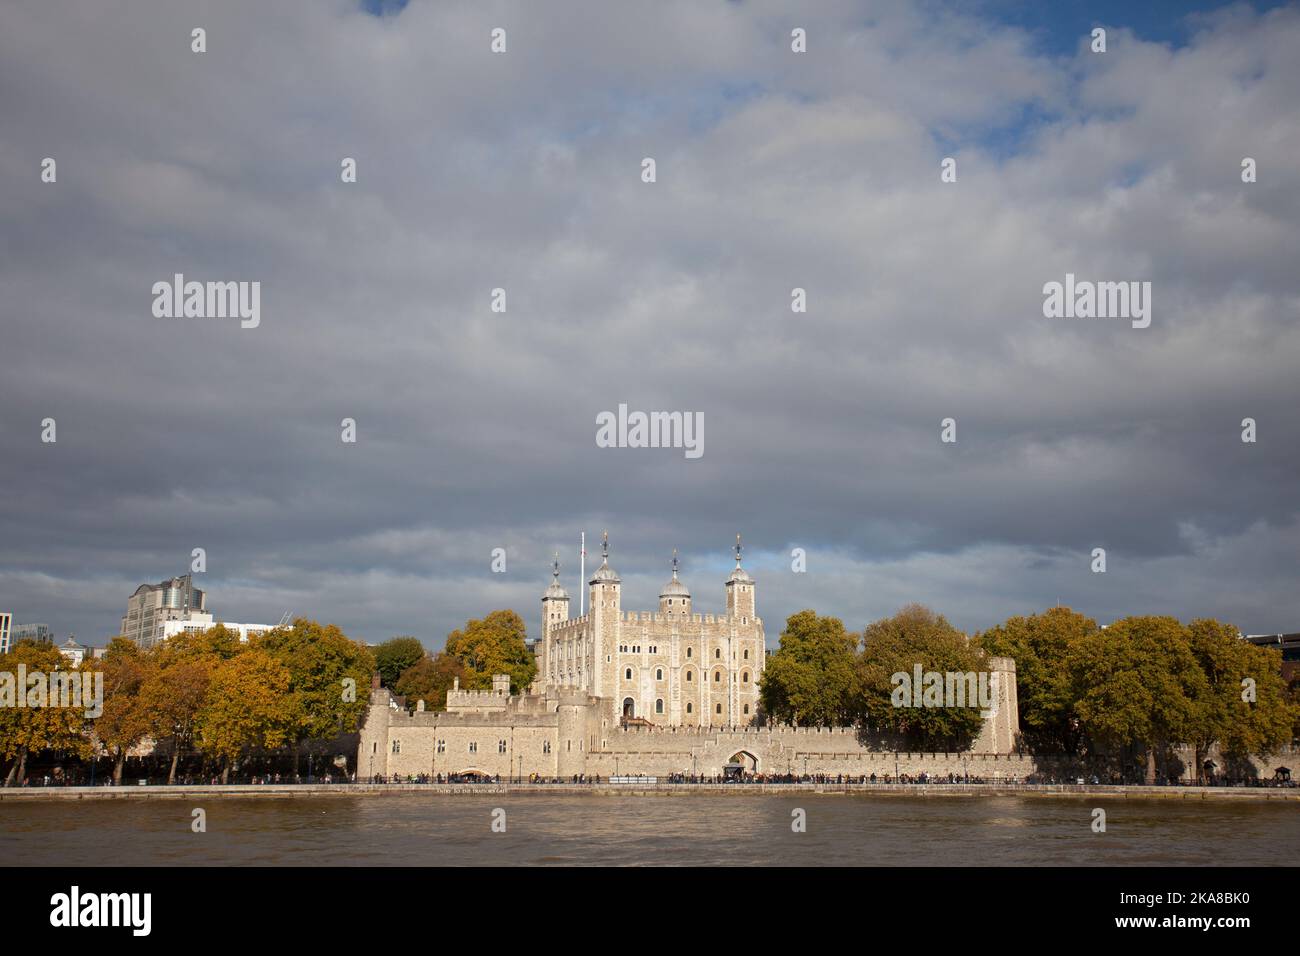 The Tower of London from the River Thames. England Stock Photo